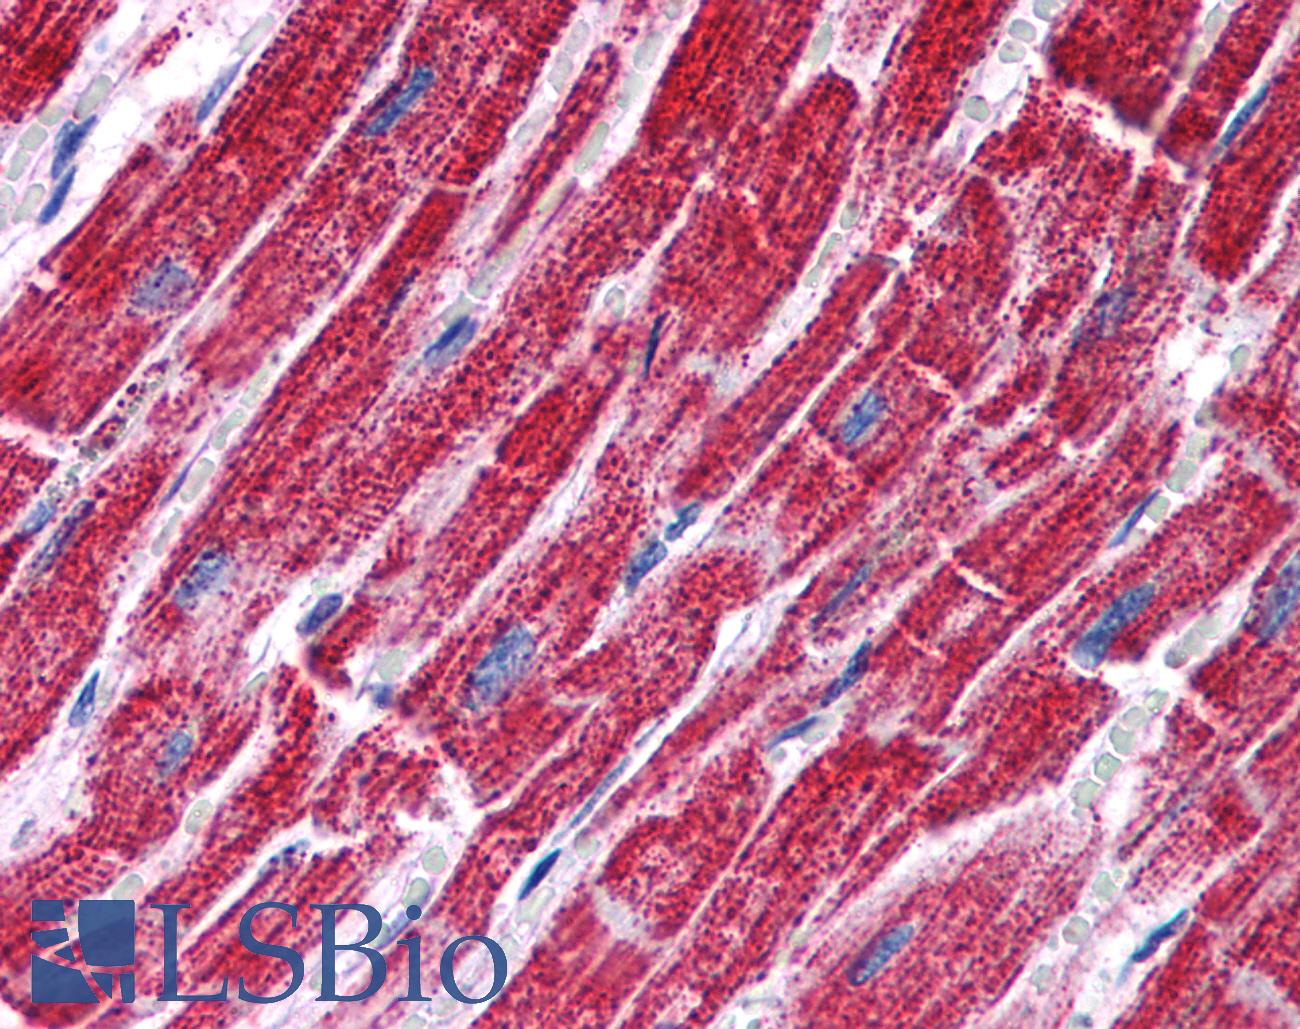 FH / Fumarase / MCL Antibody - Anti-FH / Fumarase antibody IHC of human heart. Immunohistochemistry of formalin-fixed, paraffin-embedded tissue after heat-induced antigen retrieval. Antibody concentration 3.75 ug/ml.